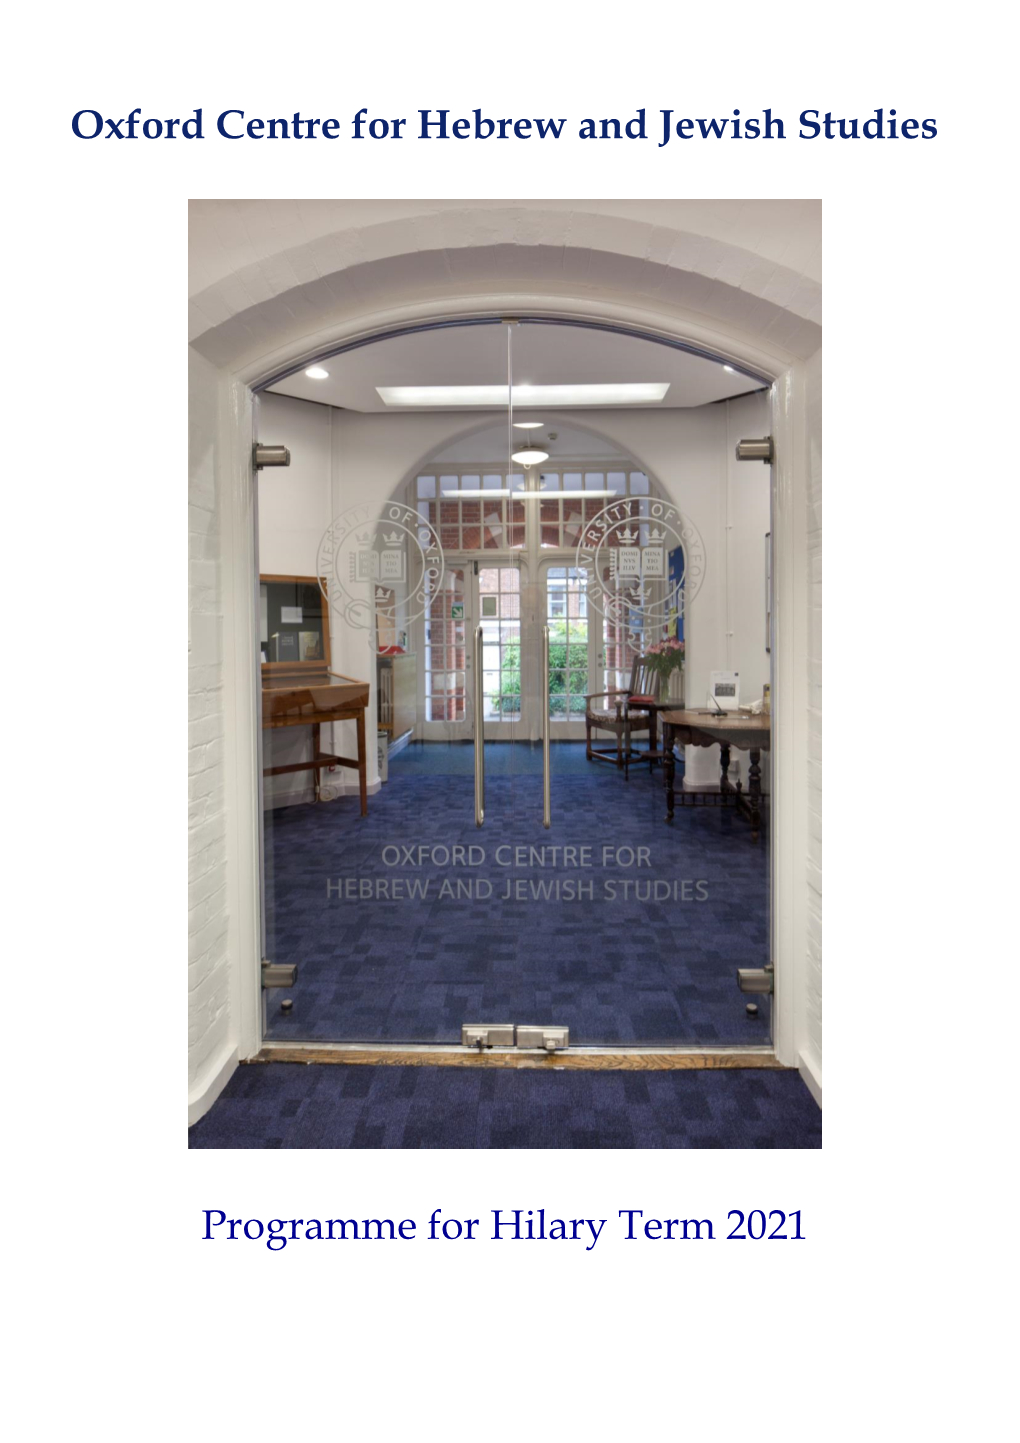 Oxford Centre for Hebrew and Jewish Studies Programme for Hilary Term